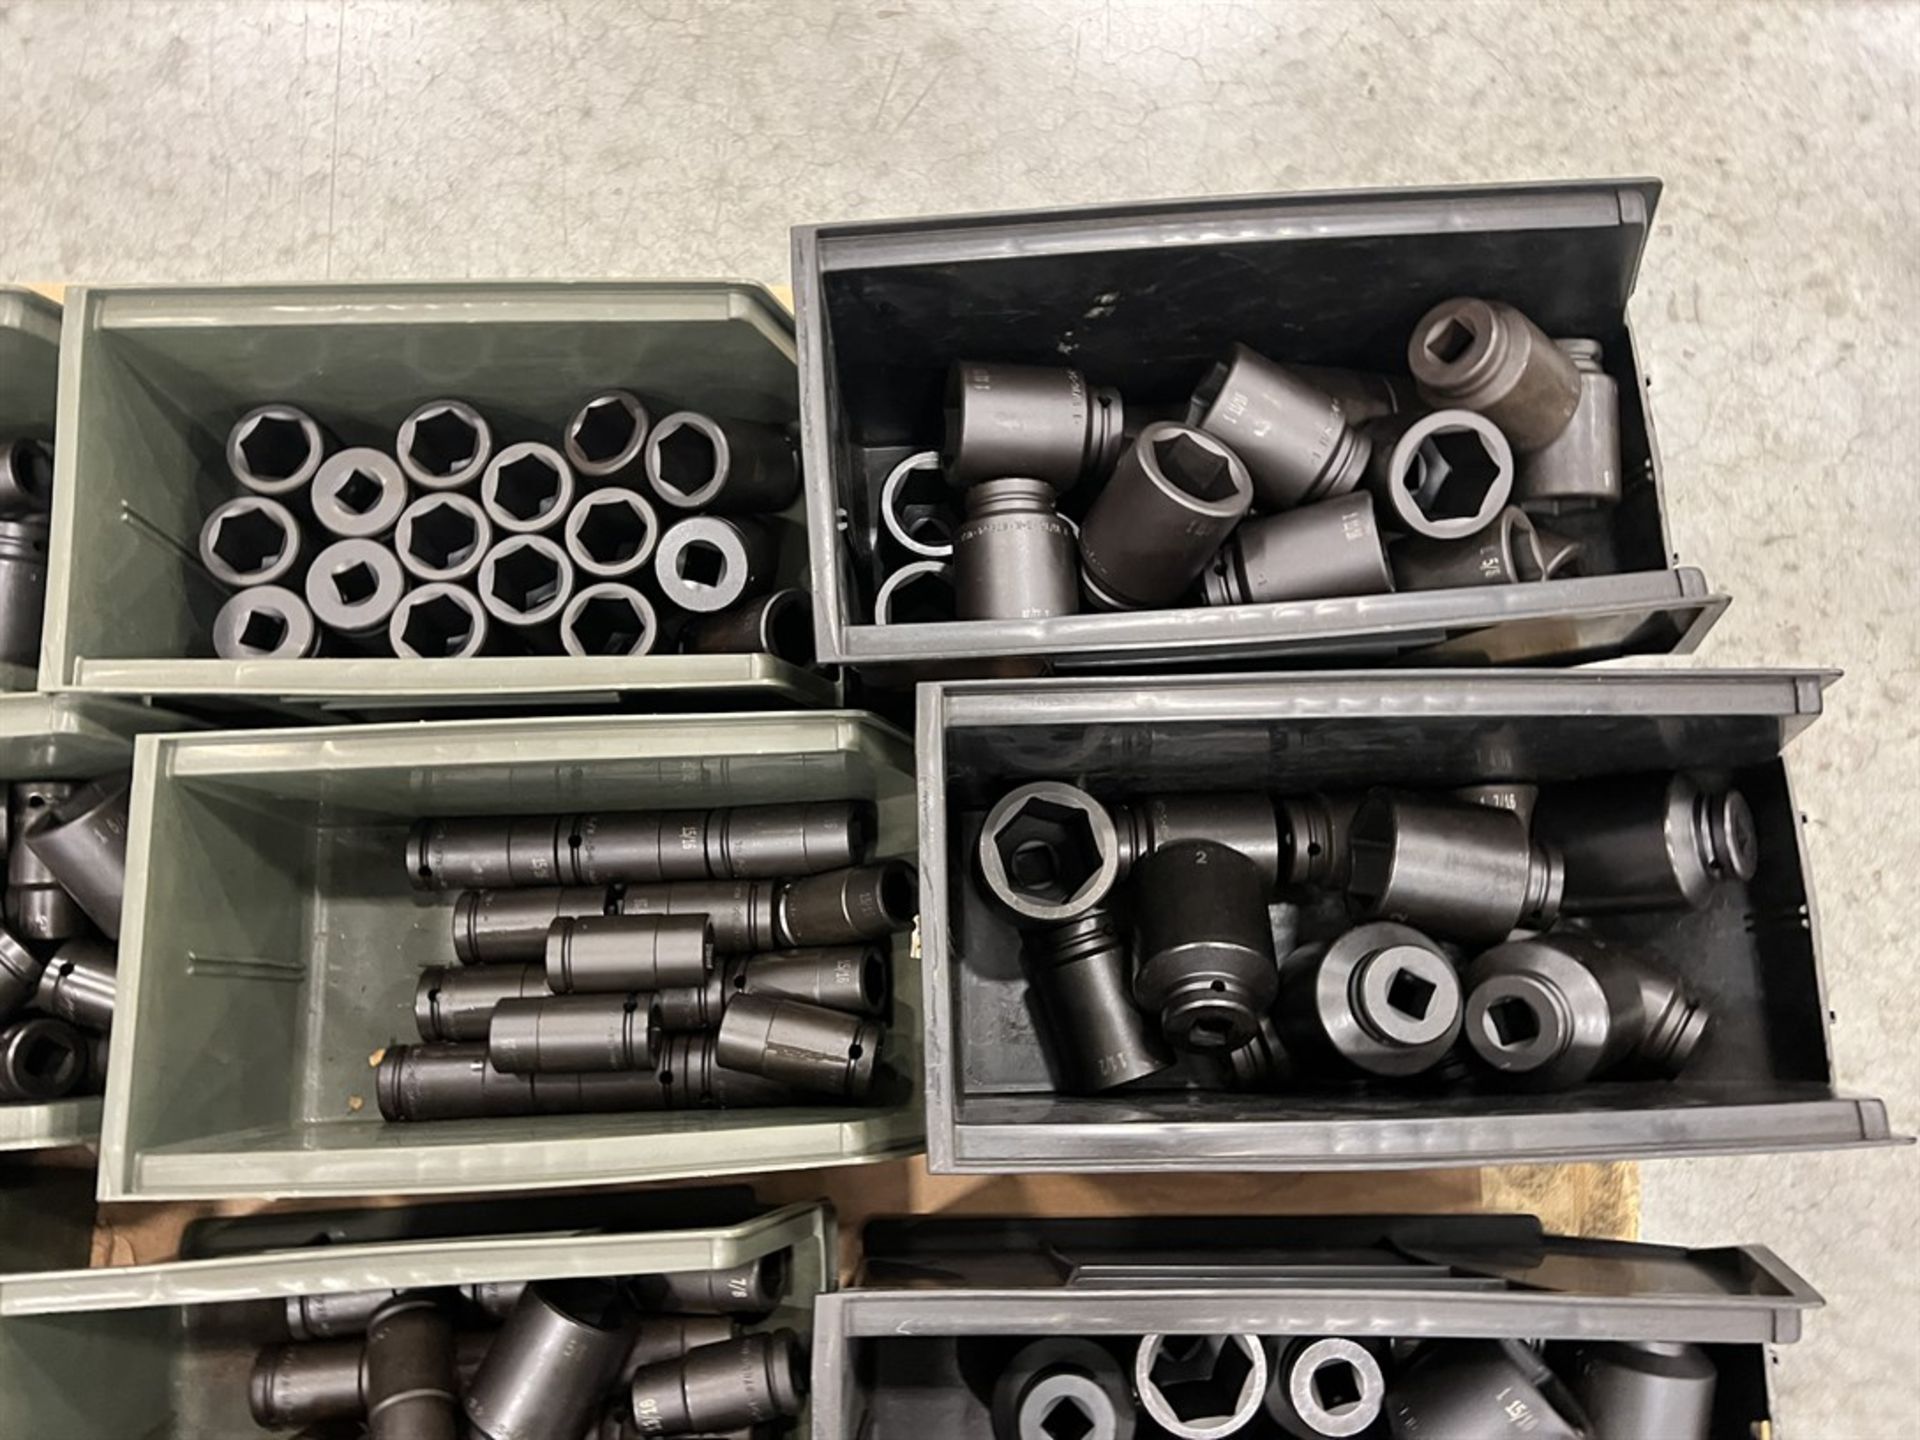 Pallet of 3/4" Drive Impact Sockets up to 3-3/8" - Image 4 of 4